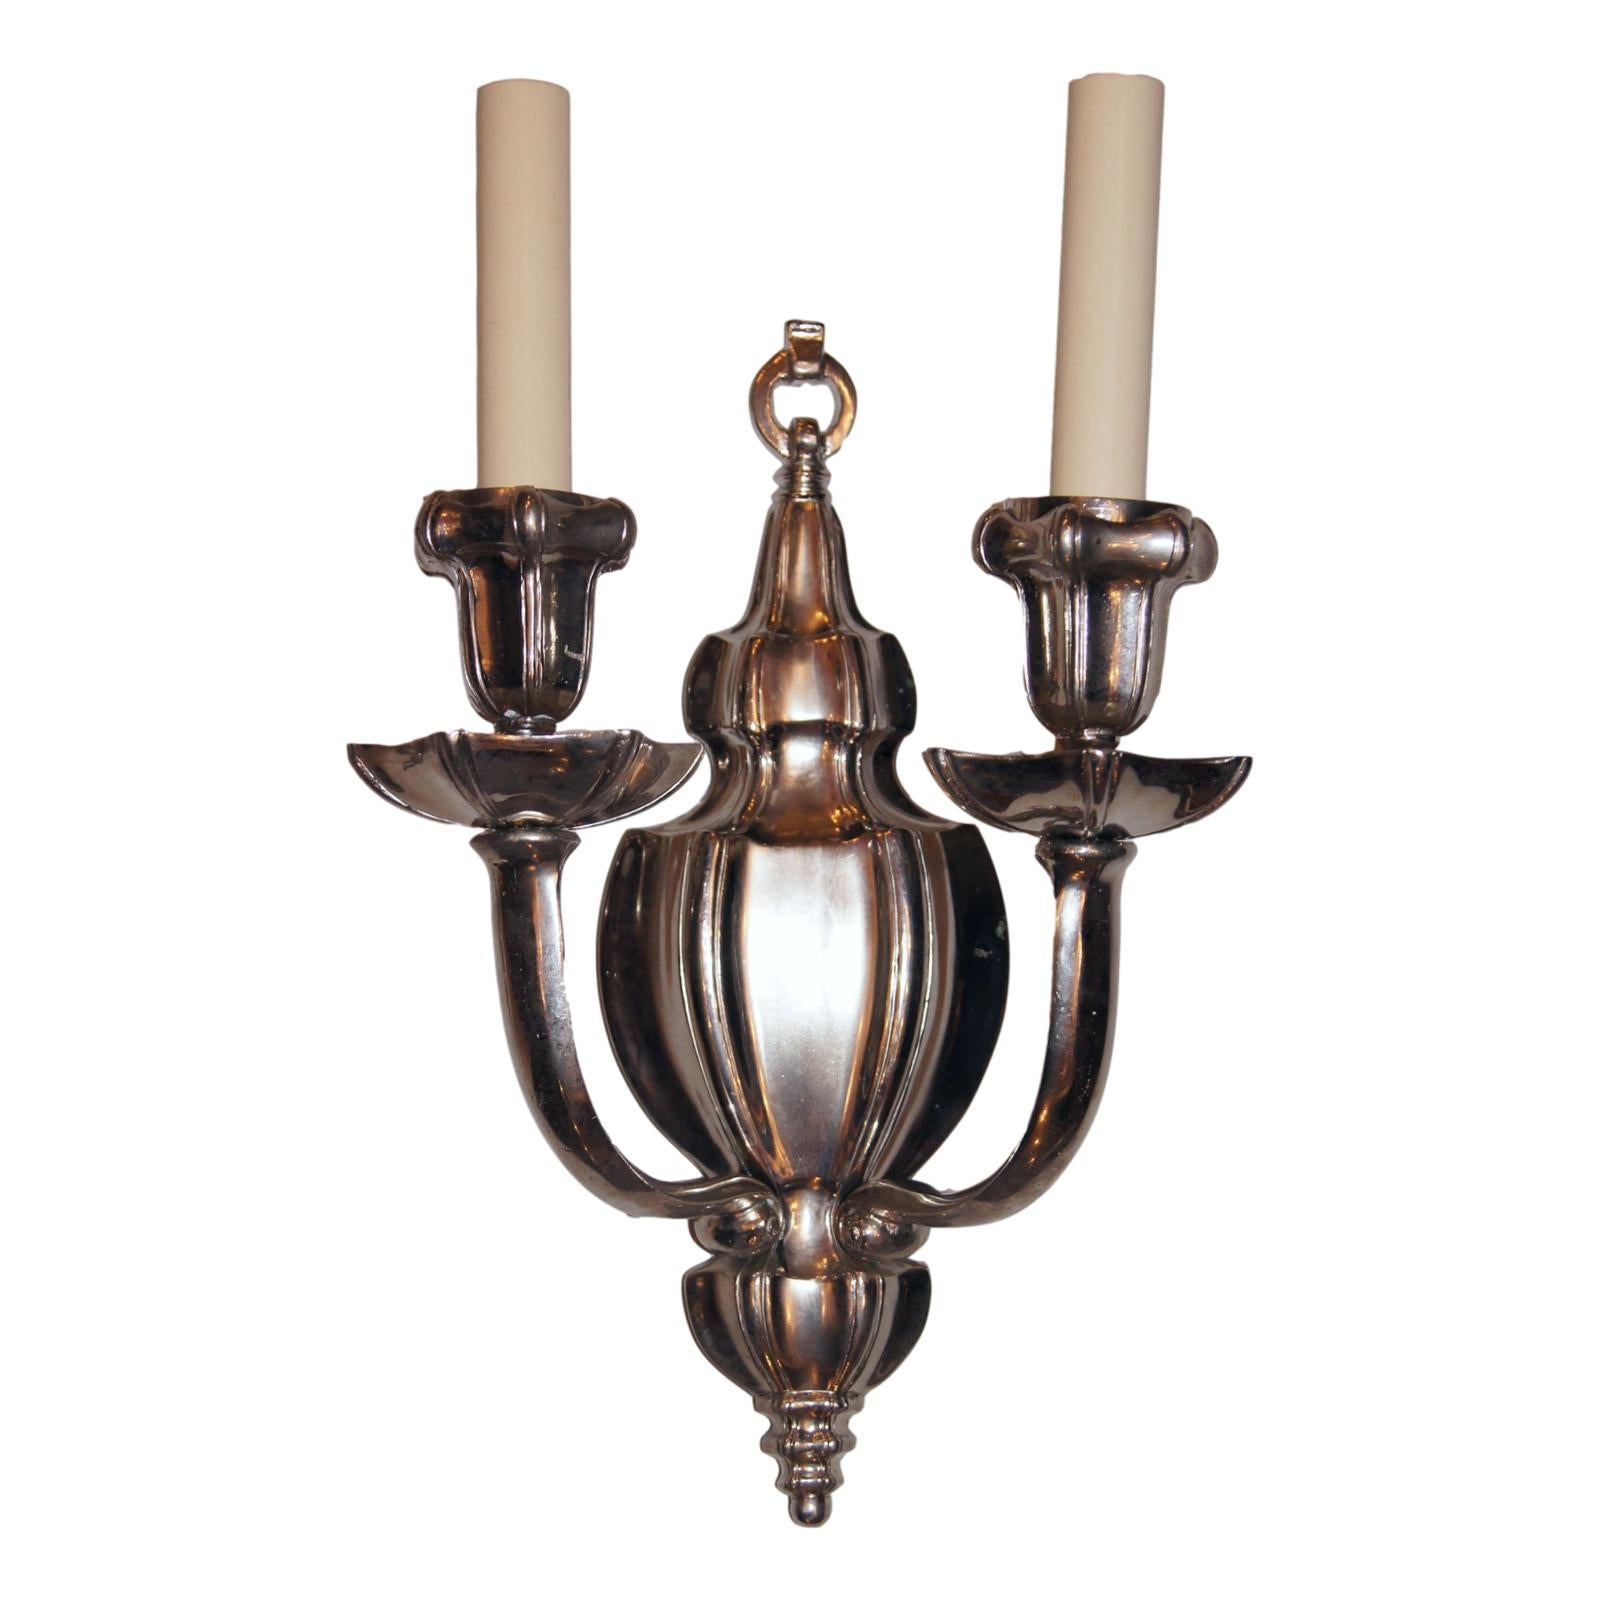 A set of eight American circa 1930s silver plated double-light sconces with original finish.

Measurements:
Height 13